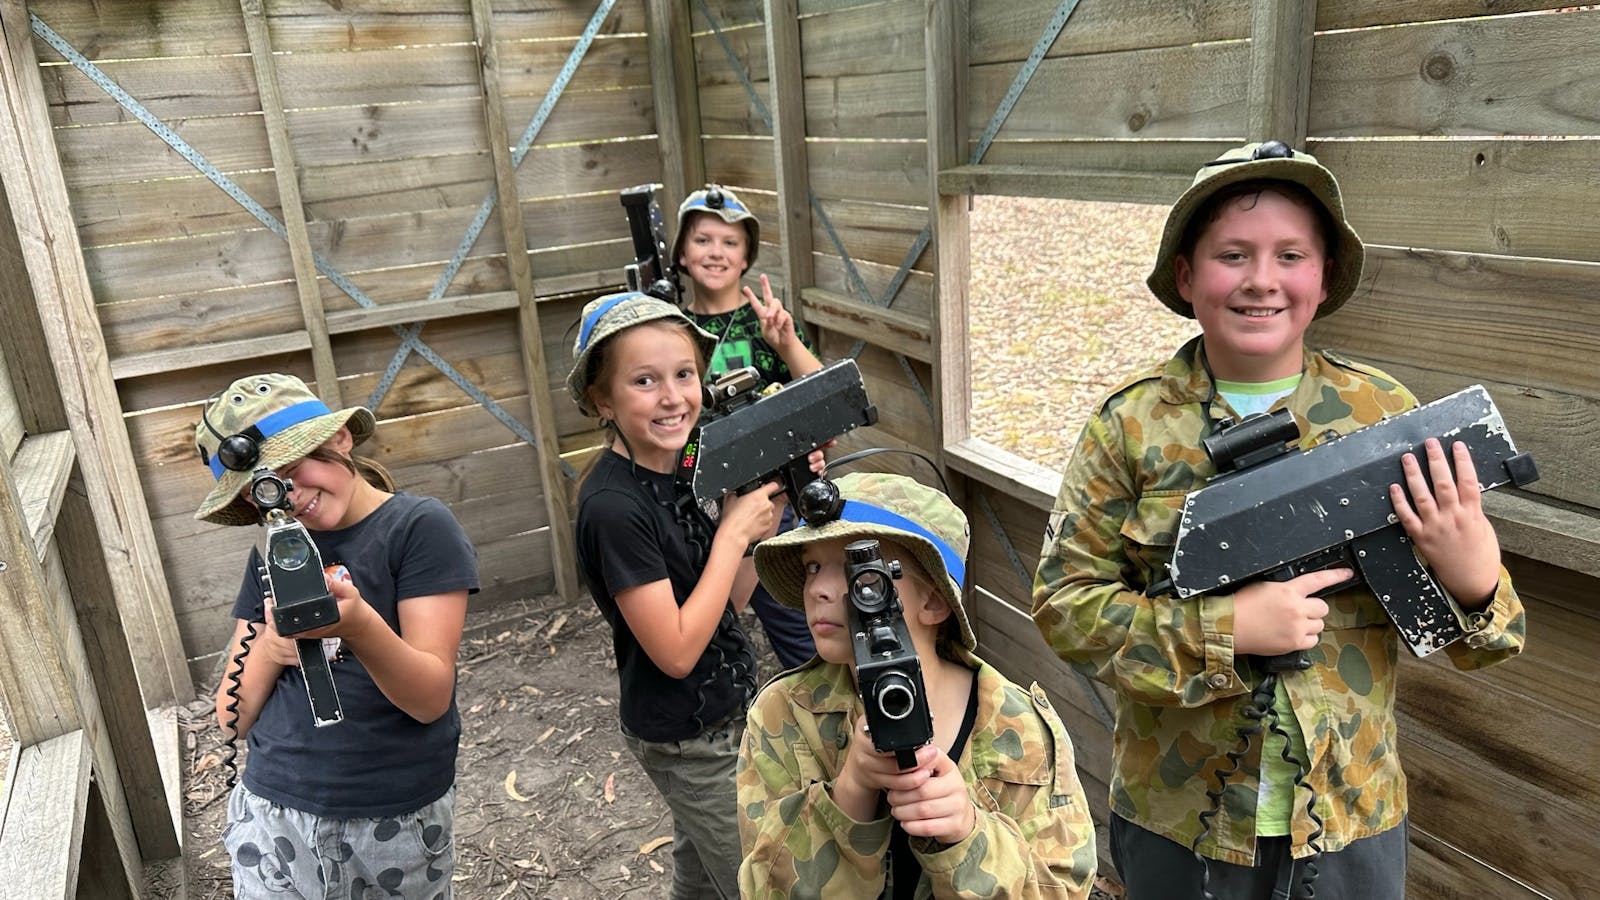 Kids in Fort playing Laser Tag Games at Hobart main field